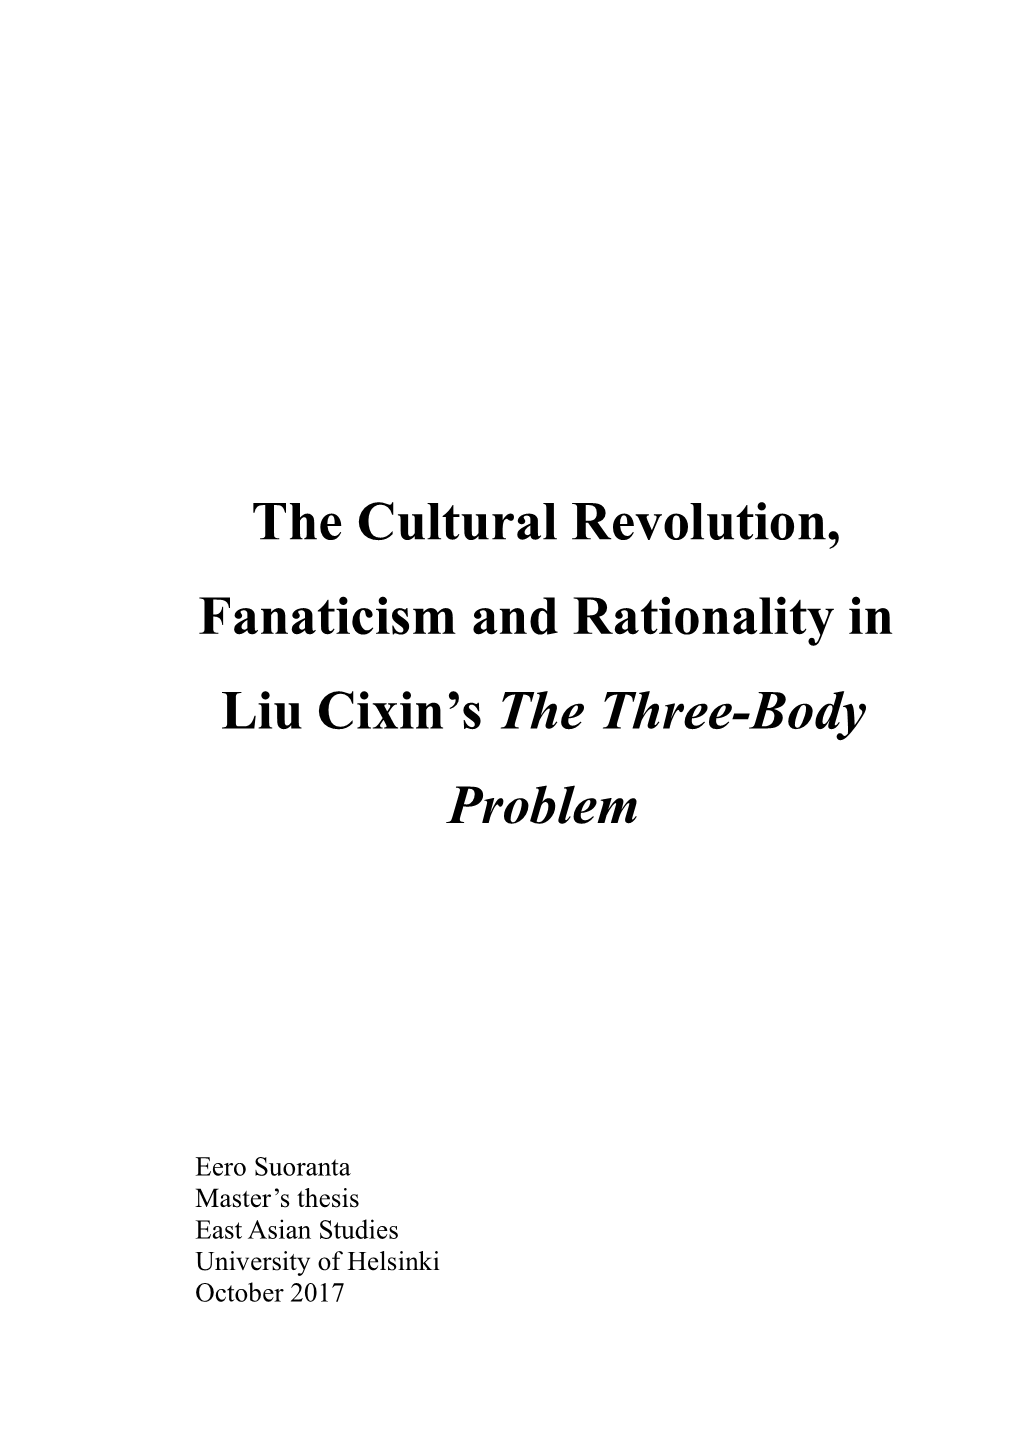 The Cultural Revolution, Fanaticism and Rationality in Liu Cixin's The